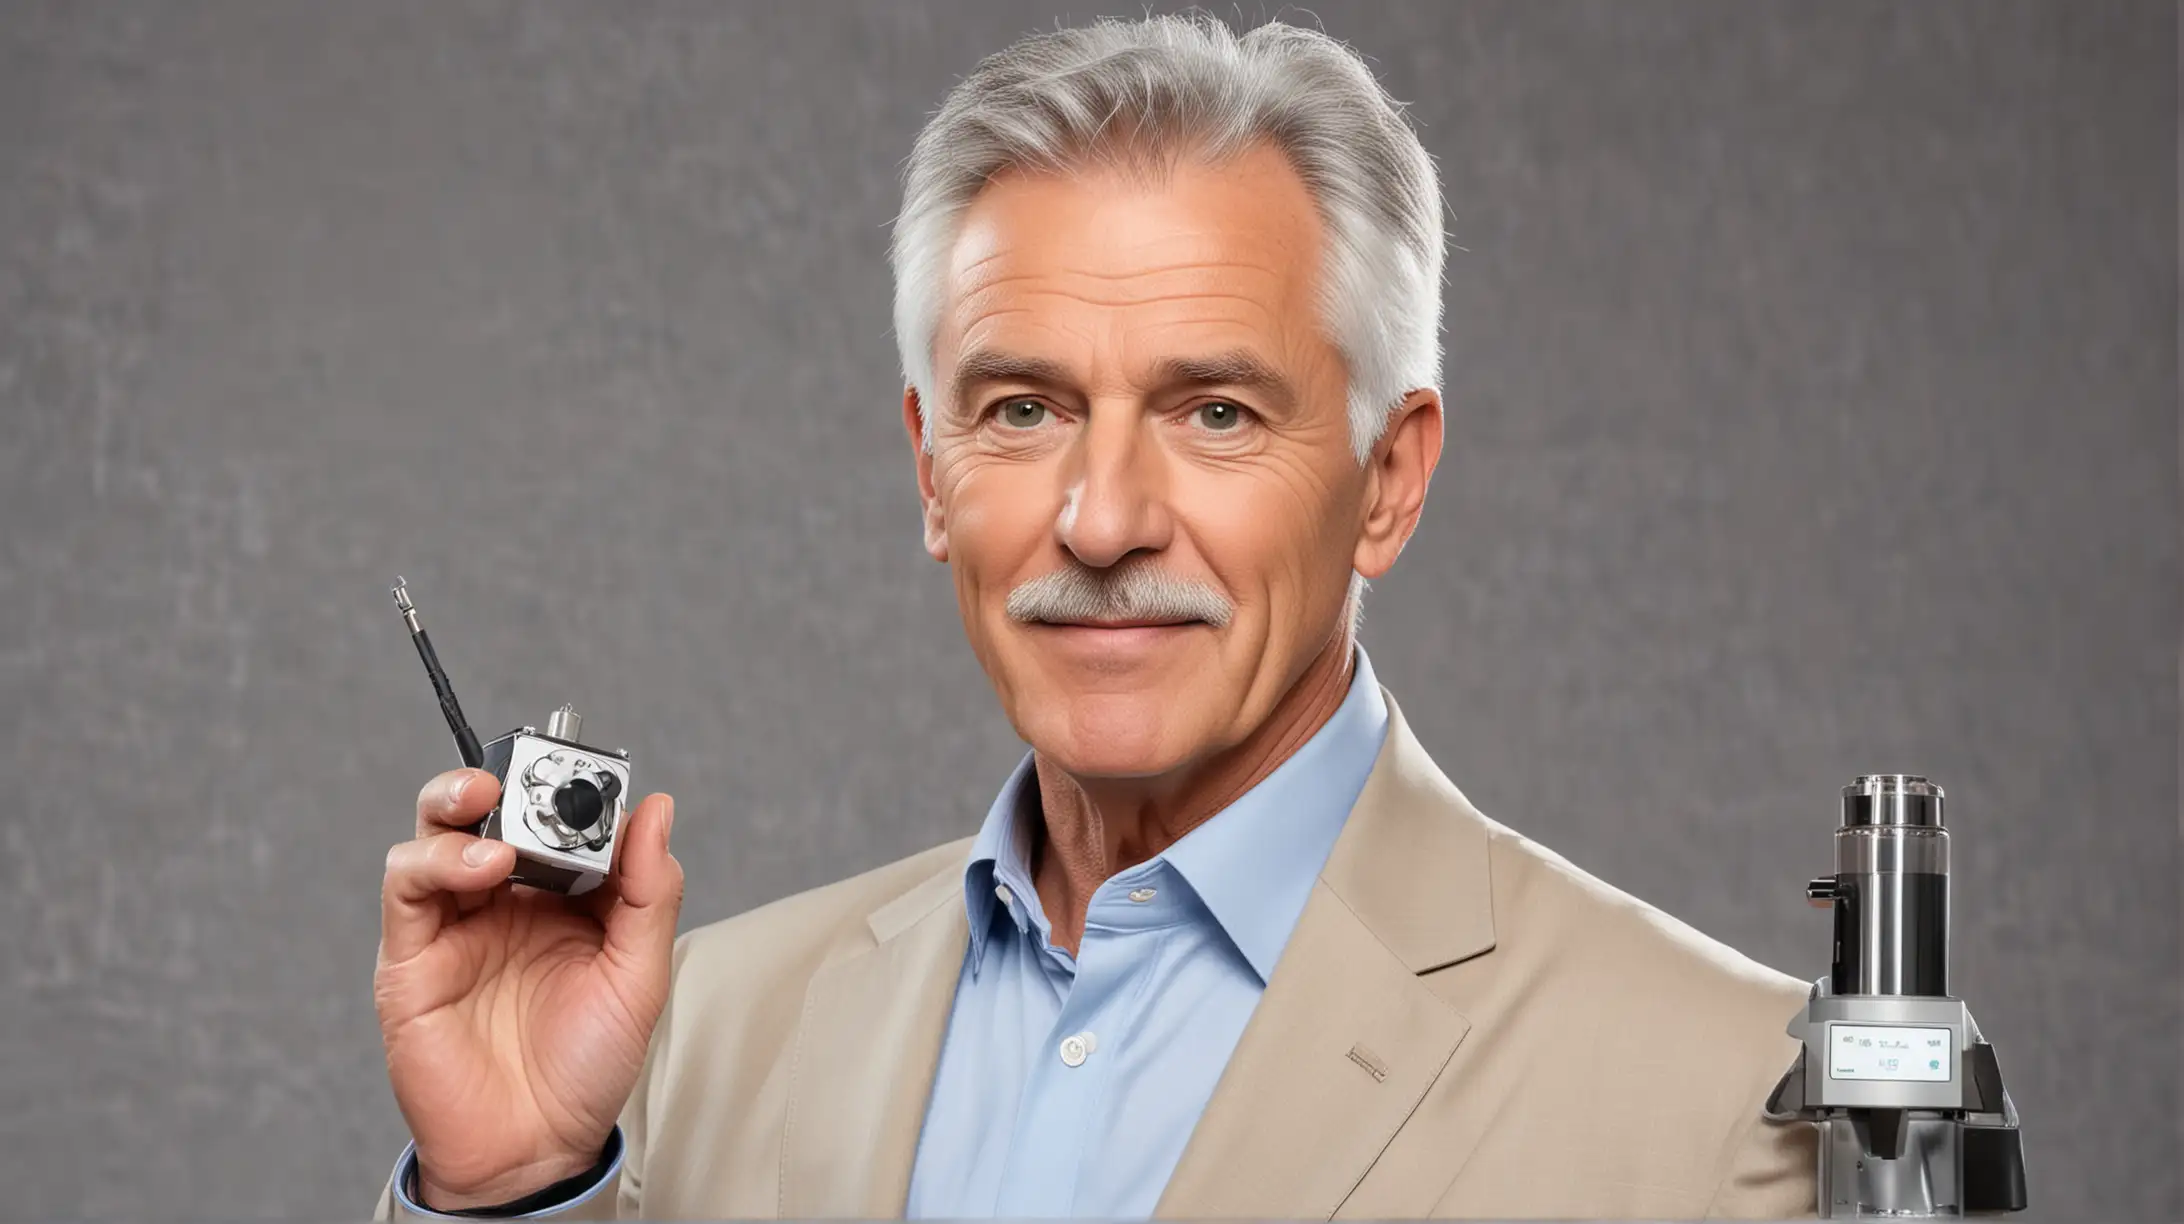 Attractive white older man tv host silver fox holding small air ionizer. On tv station.